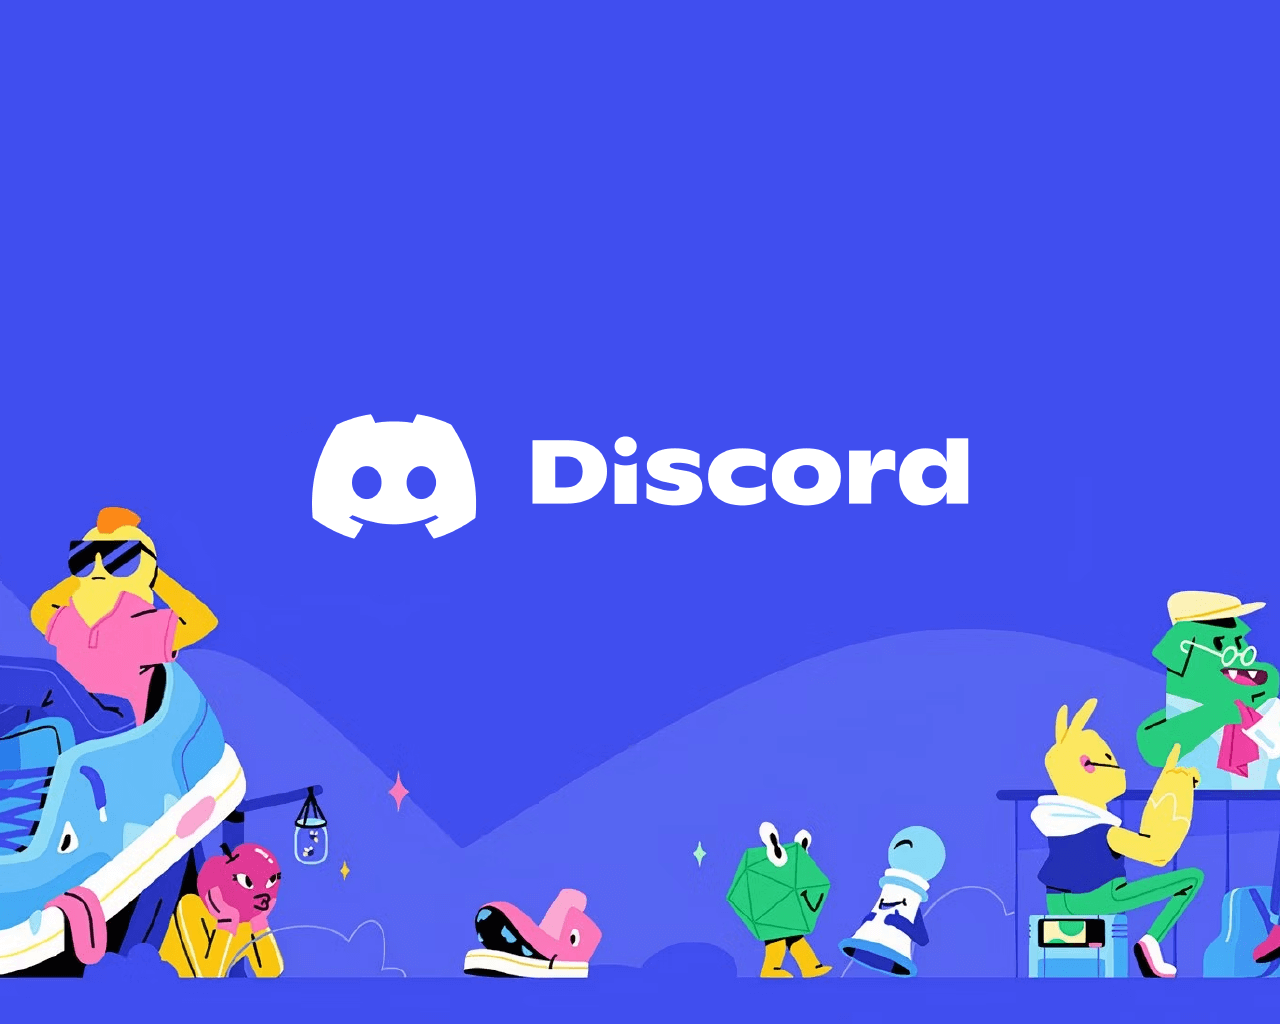 Become part of The Desistance in our Official Discord Server